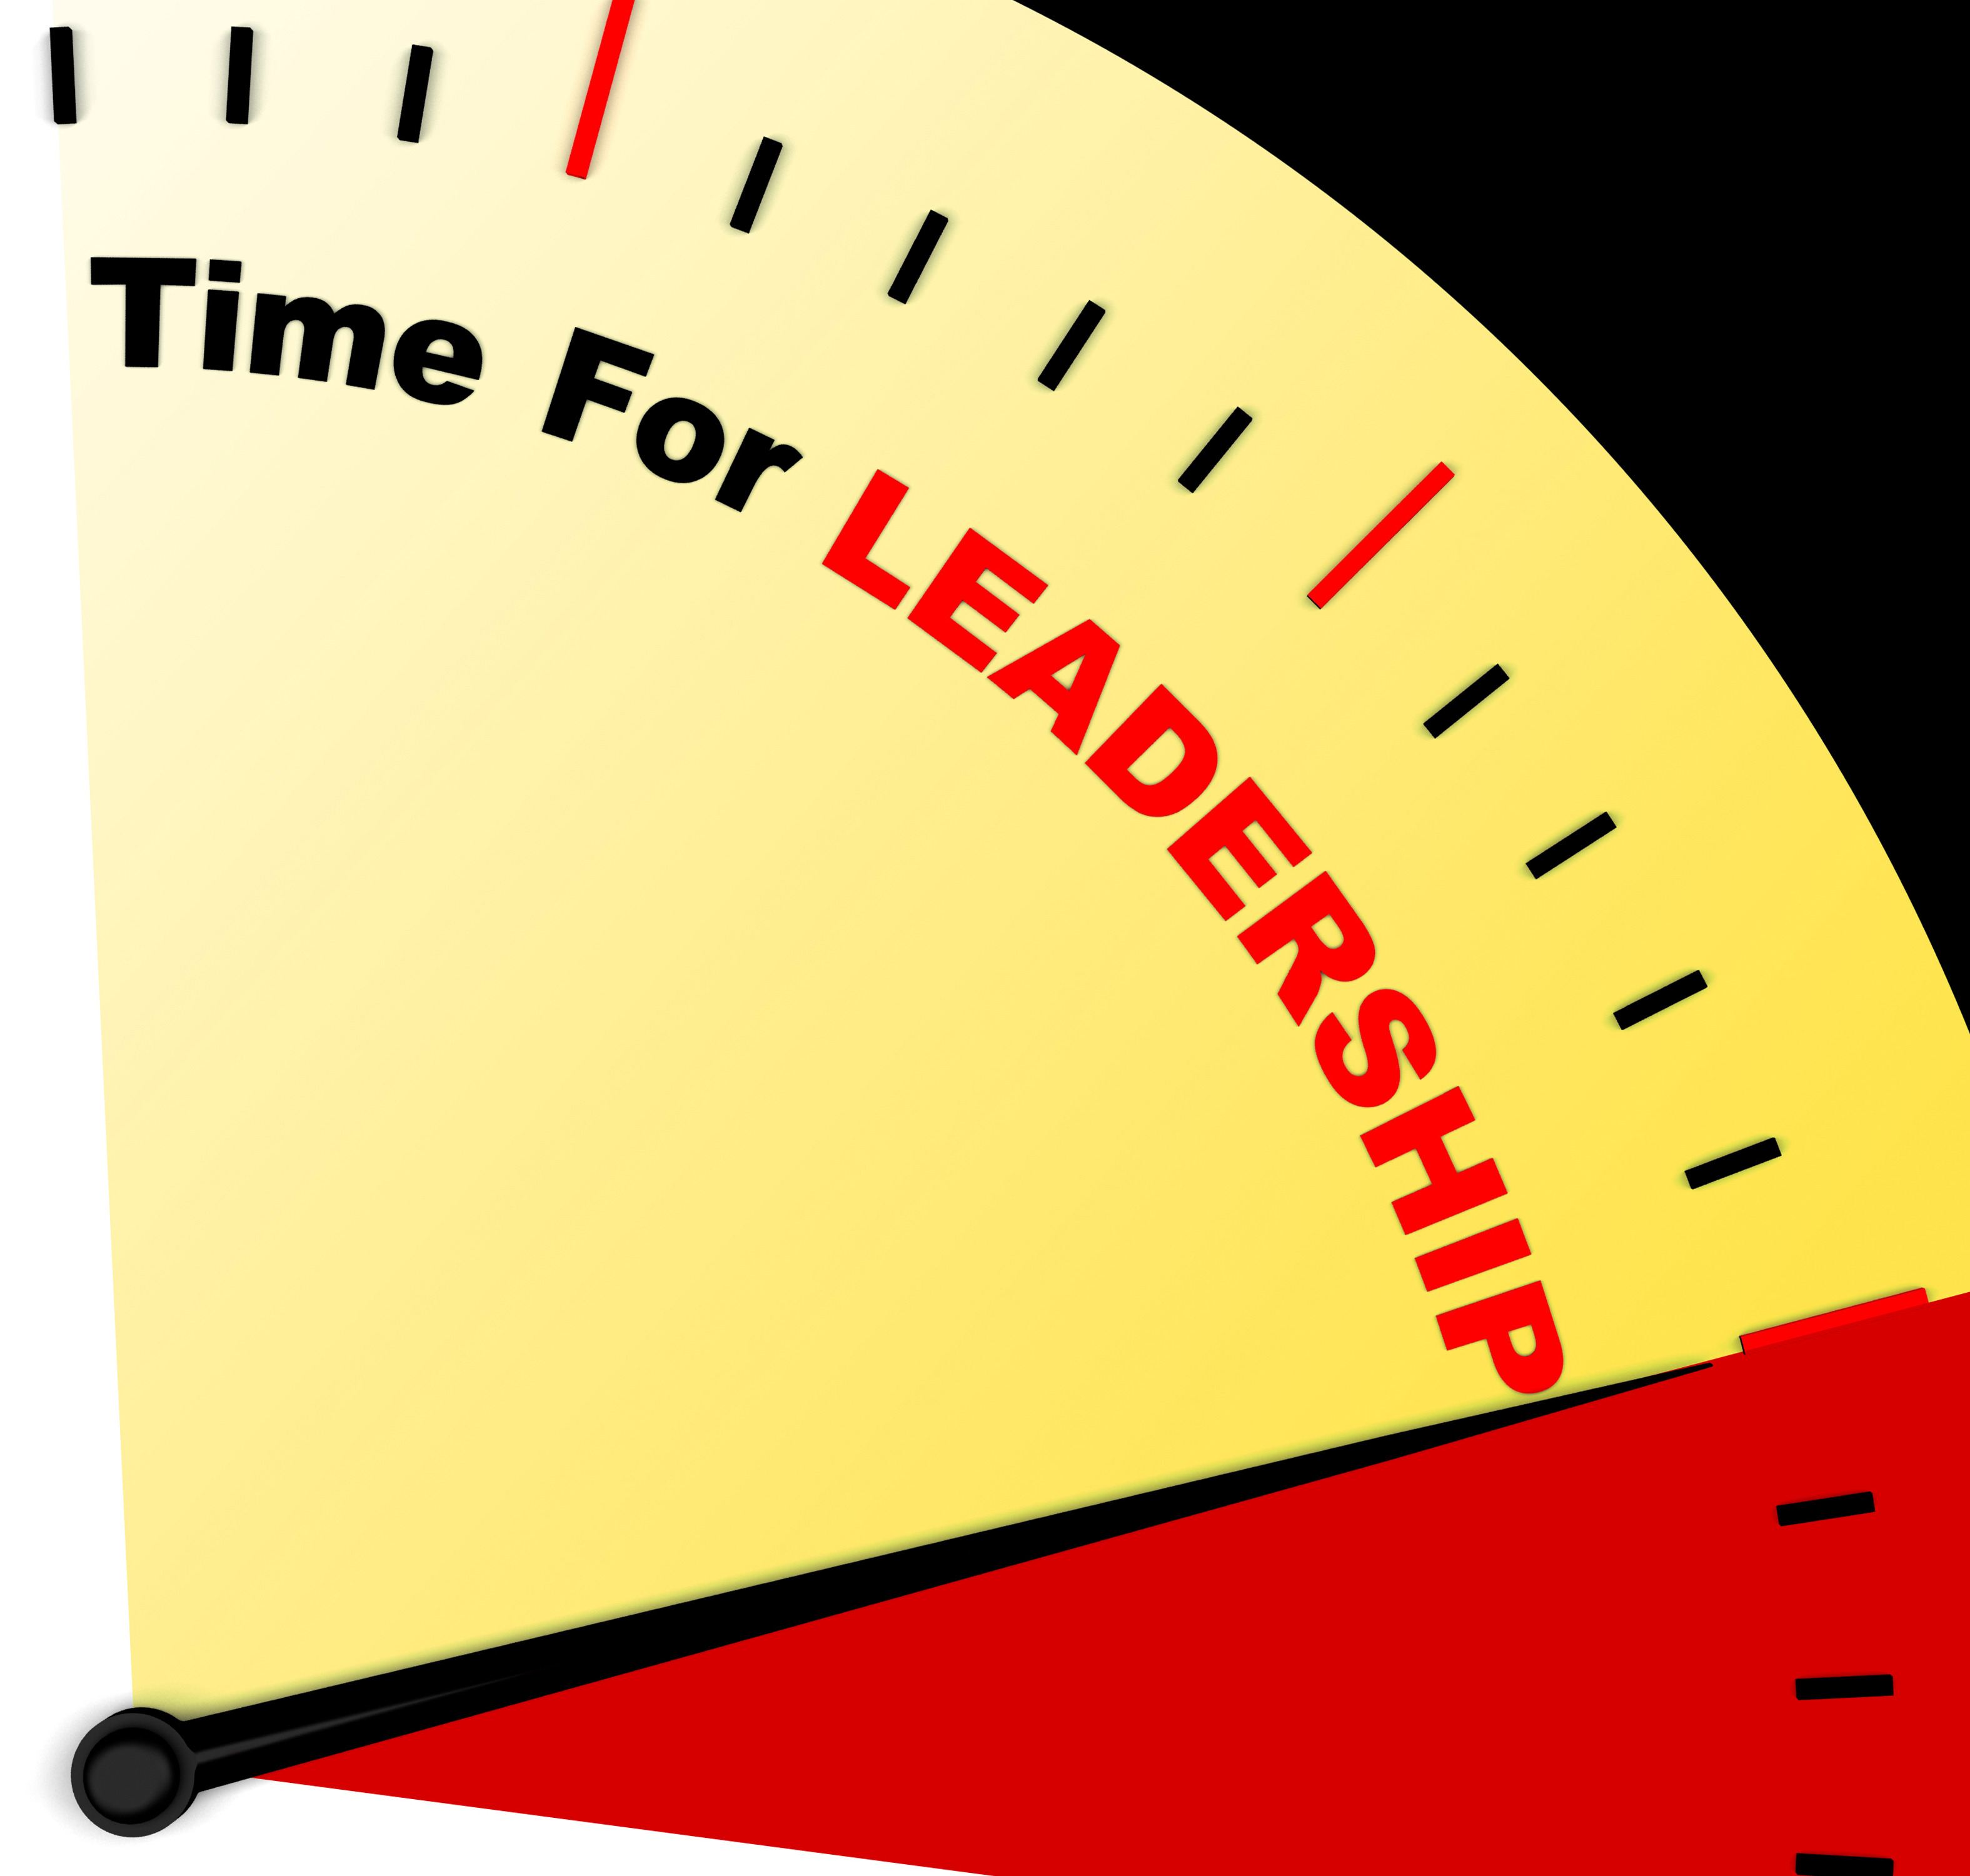 Time For Leadership Message Represents Management And Achievement